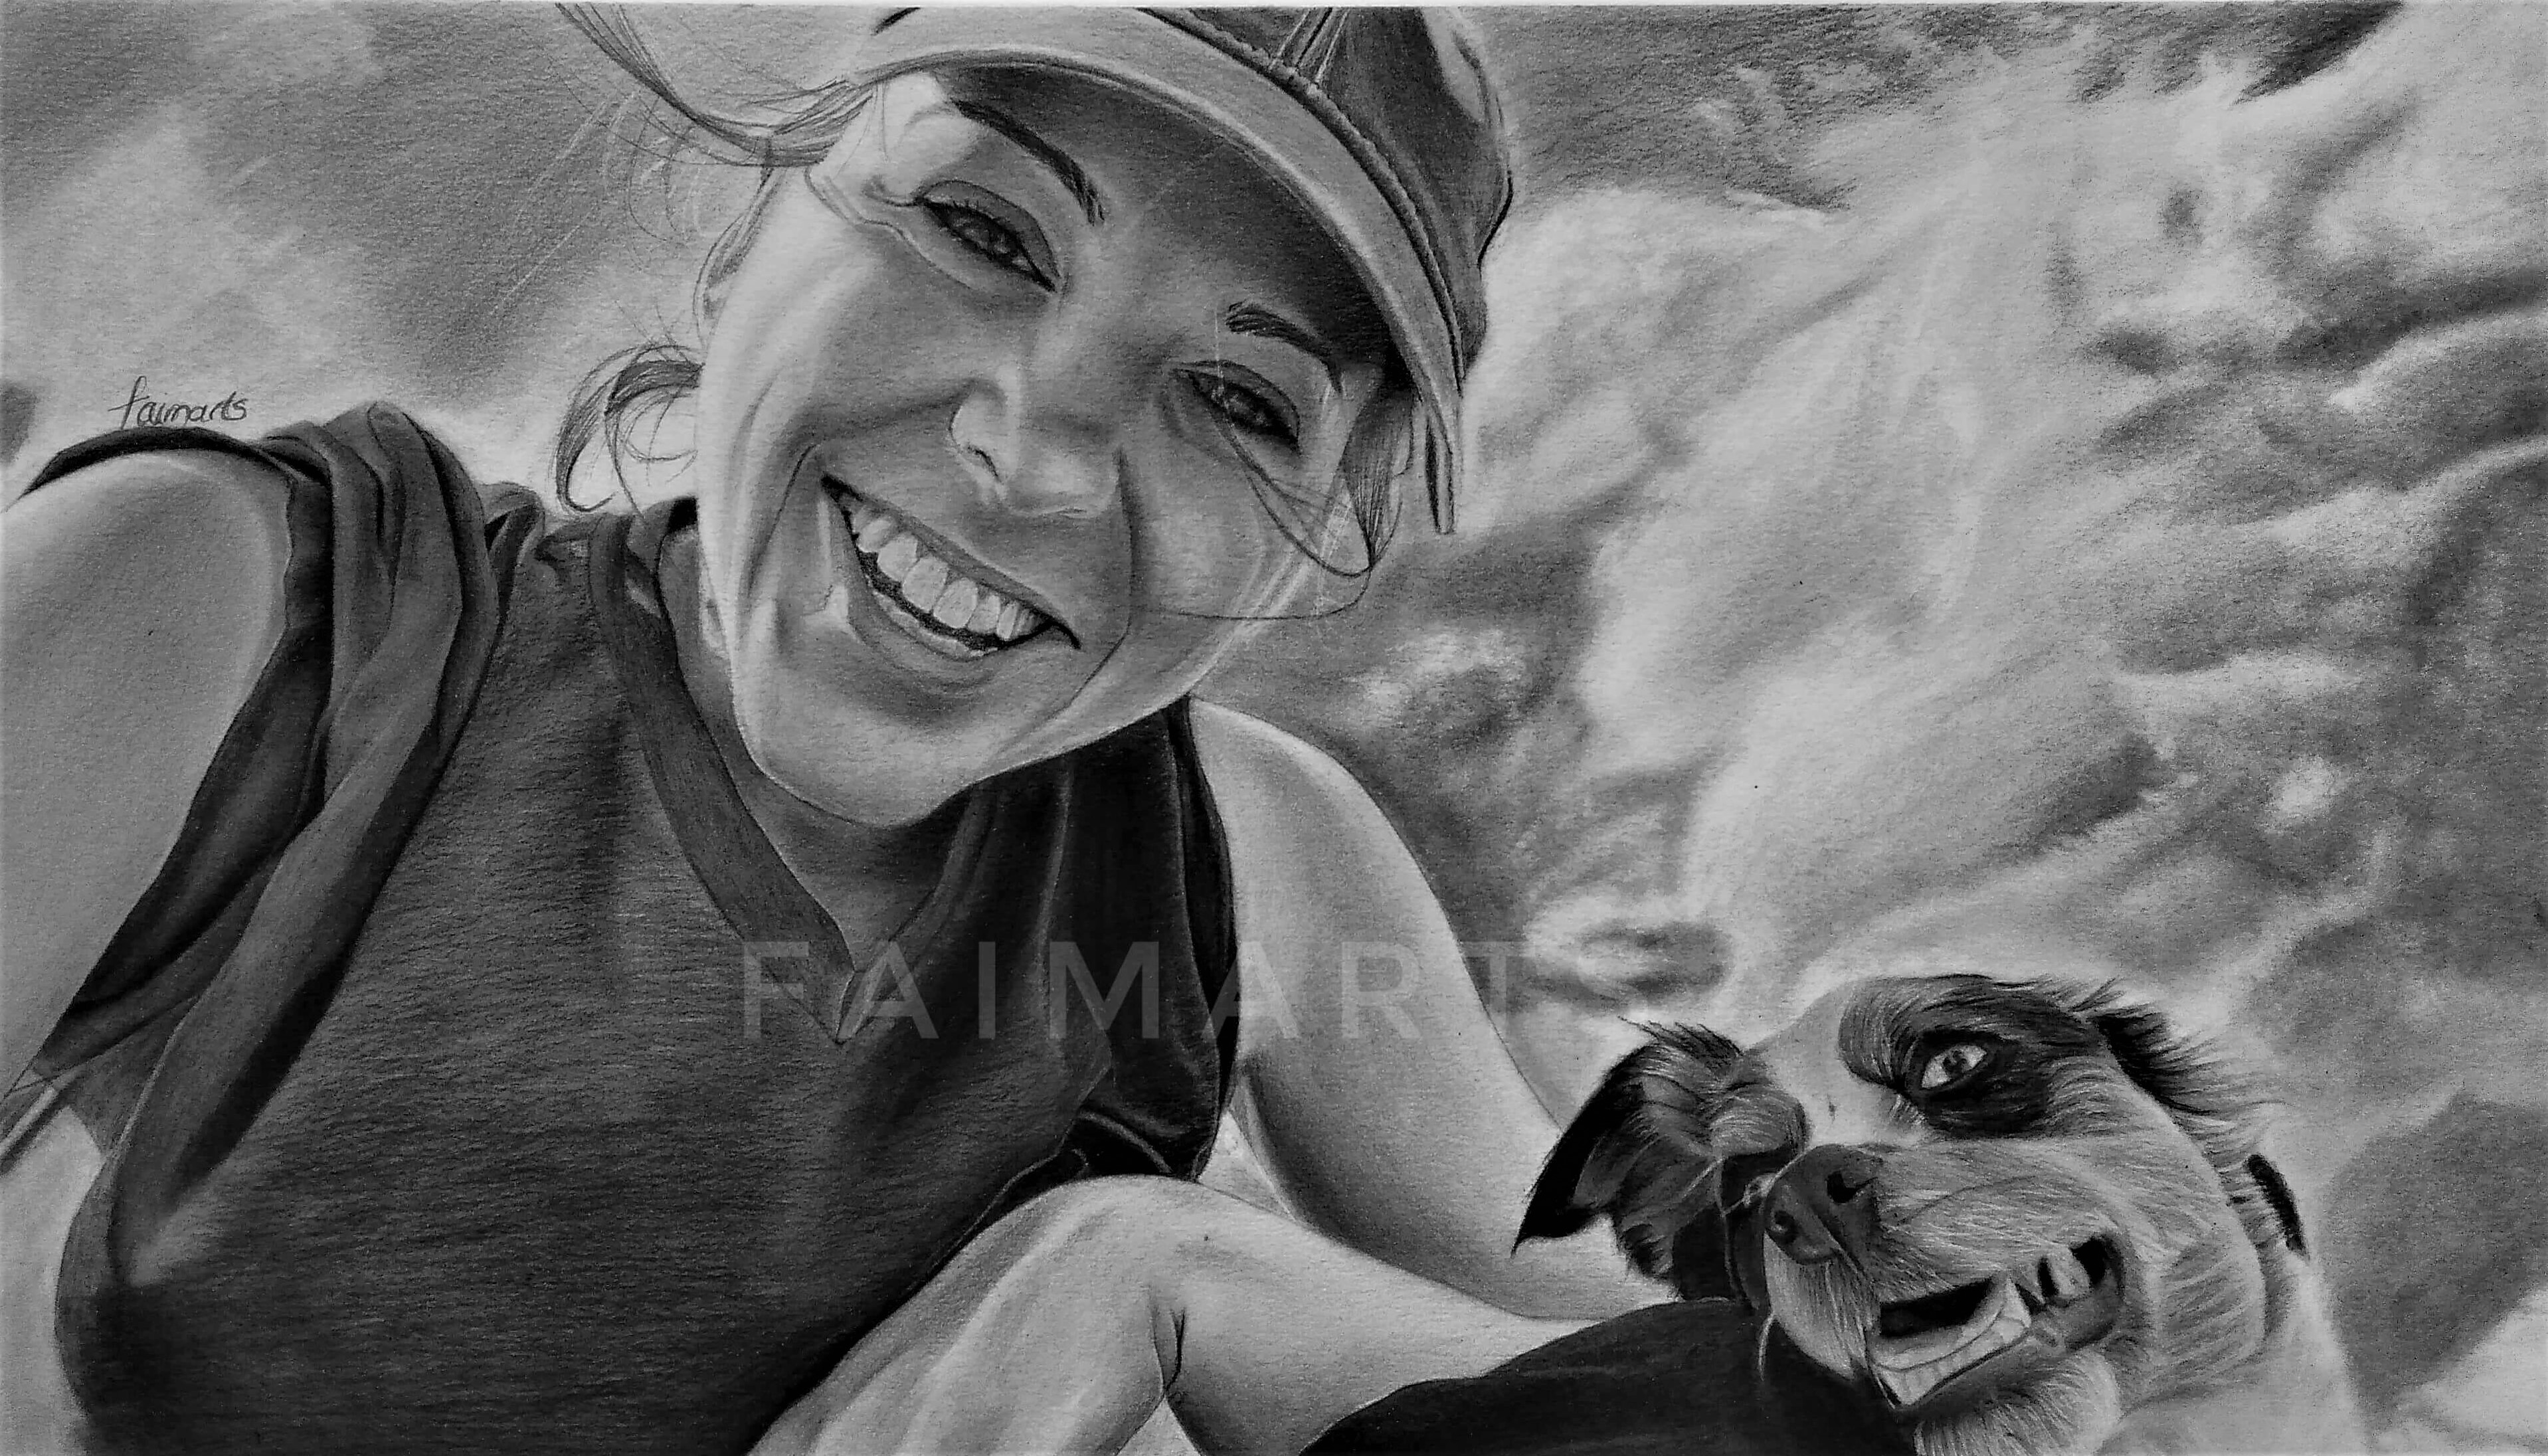 A commissioned graphite drawing